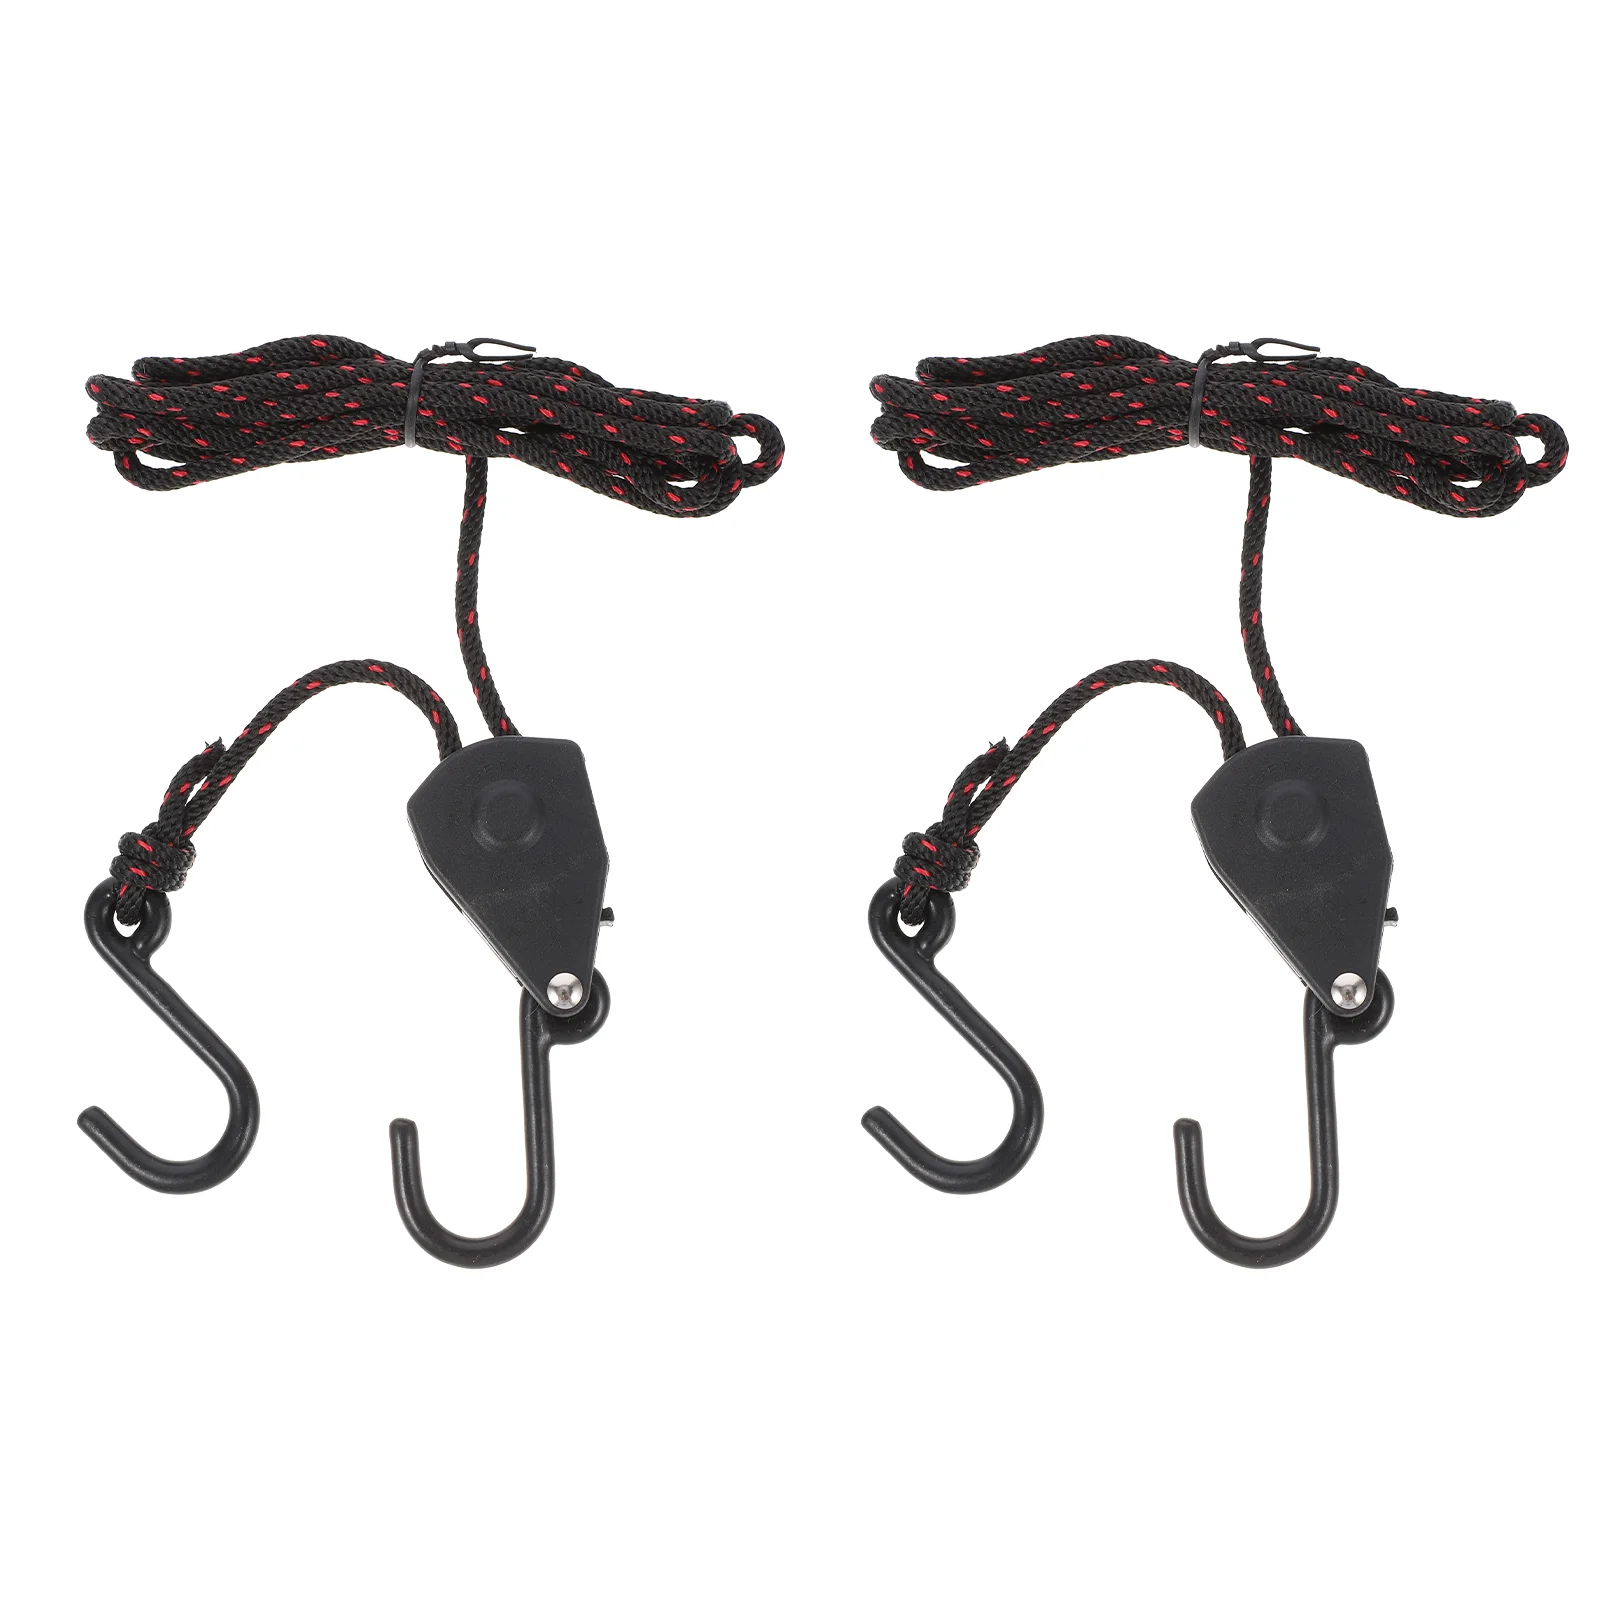 

Cargo Ratchet Pulley Rope Hanger 2PCS Kayak Tie Down Straps Canoe Bow and Stern Adjustable Rope Hanger